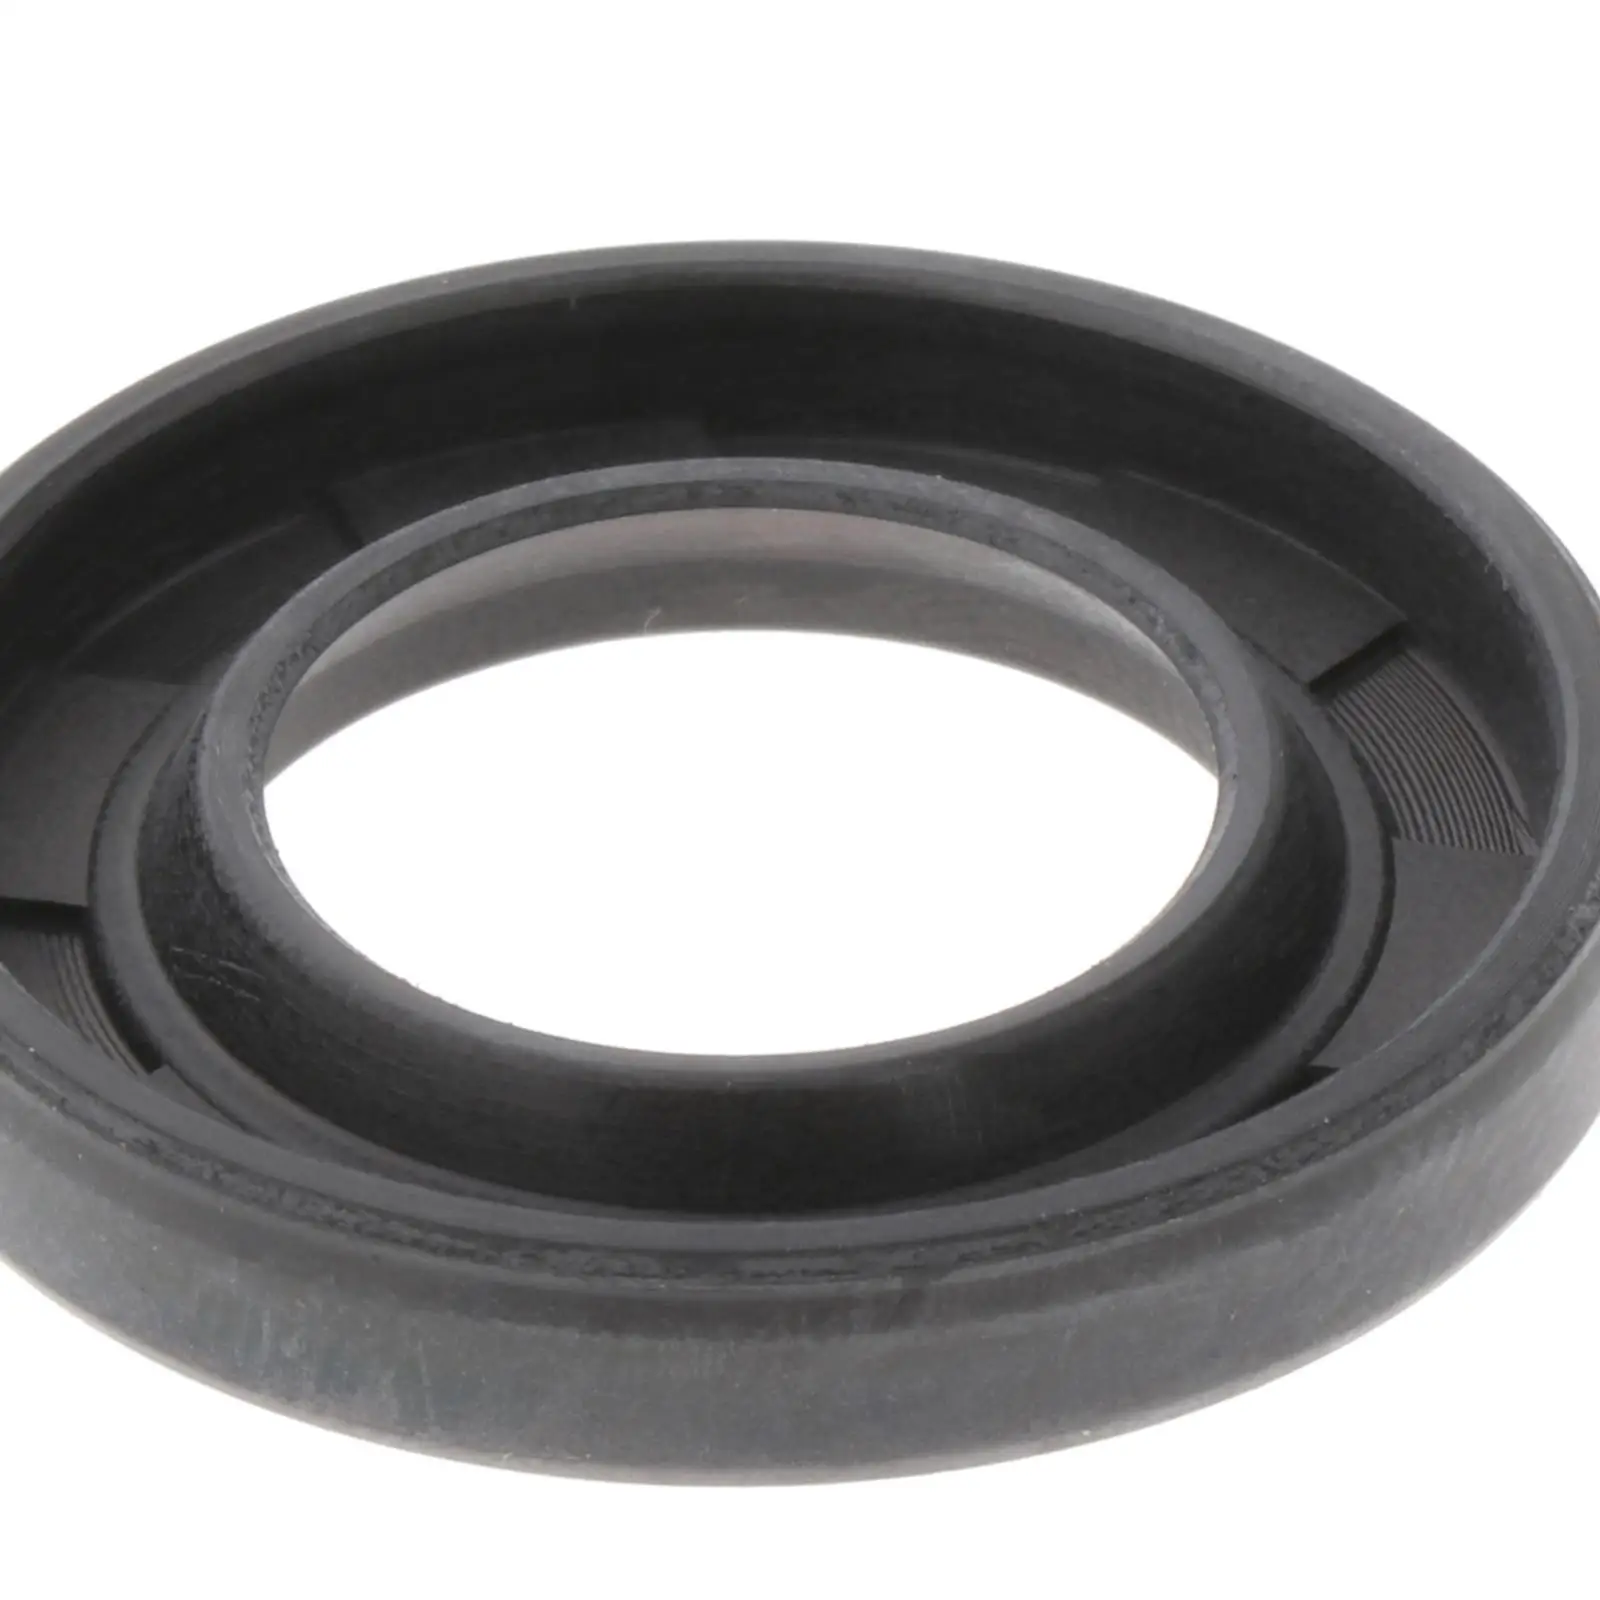 Marine Oil Seal Fit for Outboard 60HP 70HP Outboard Engine 2T 3cyl